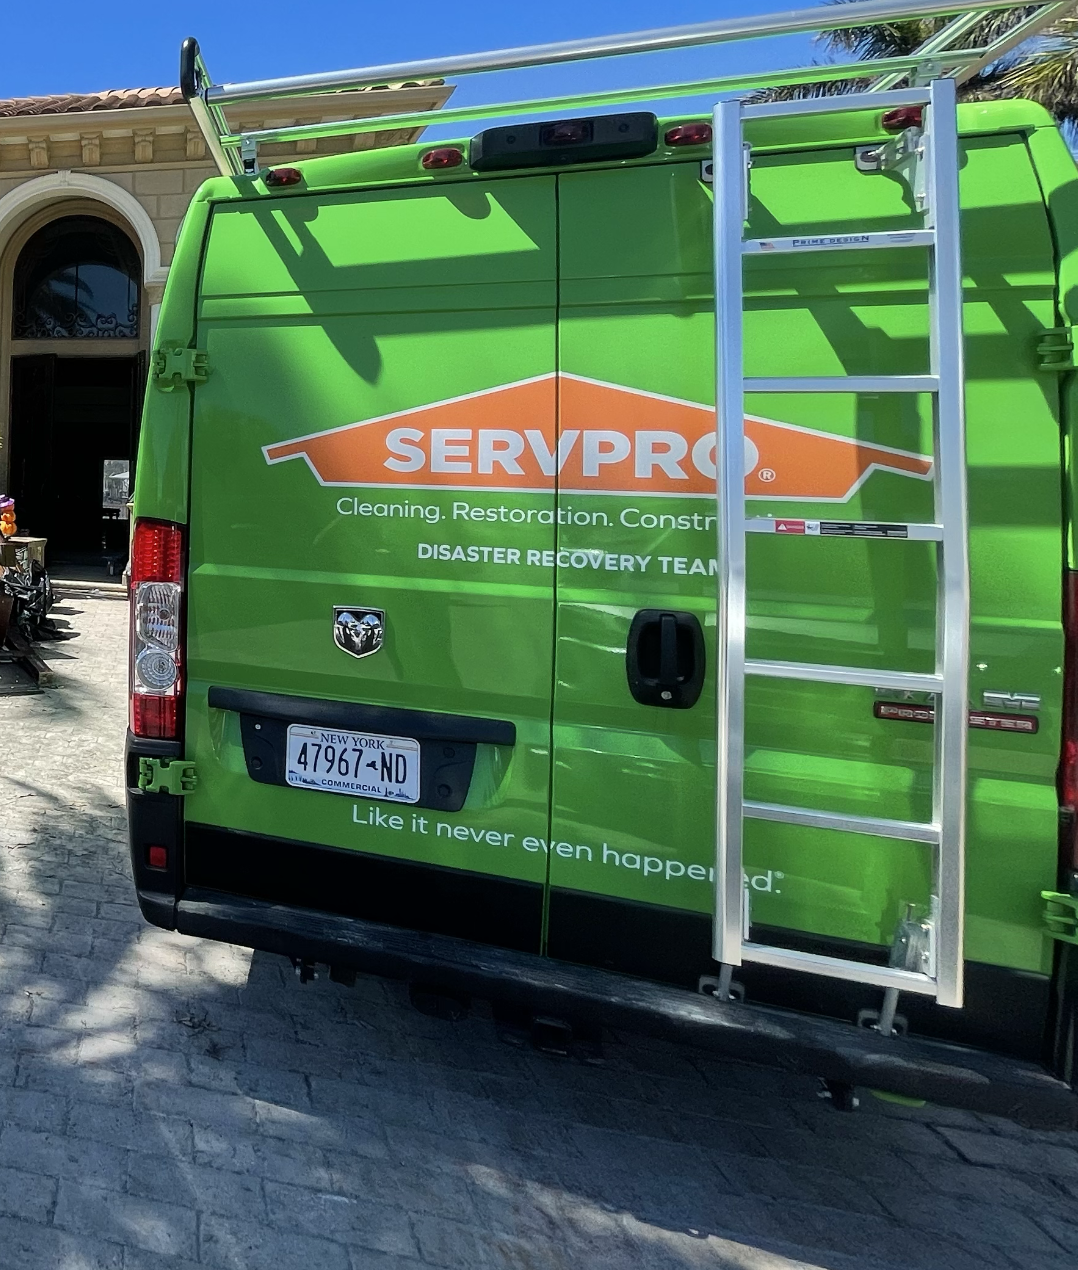 SERVPRO on The Go